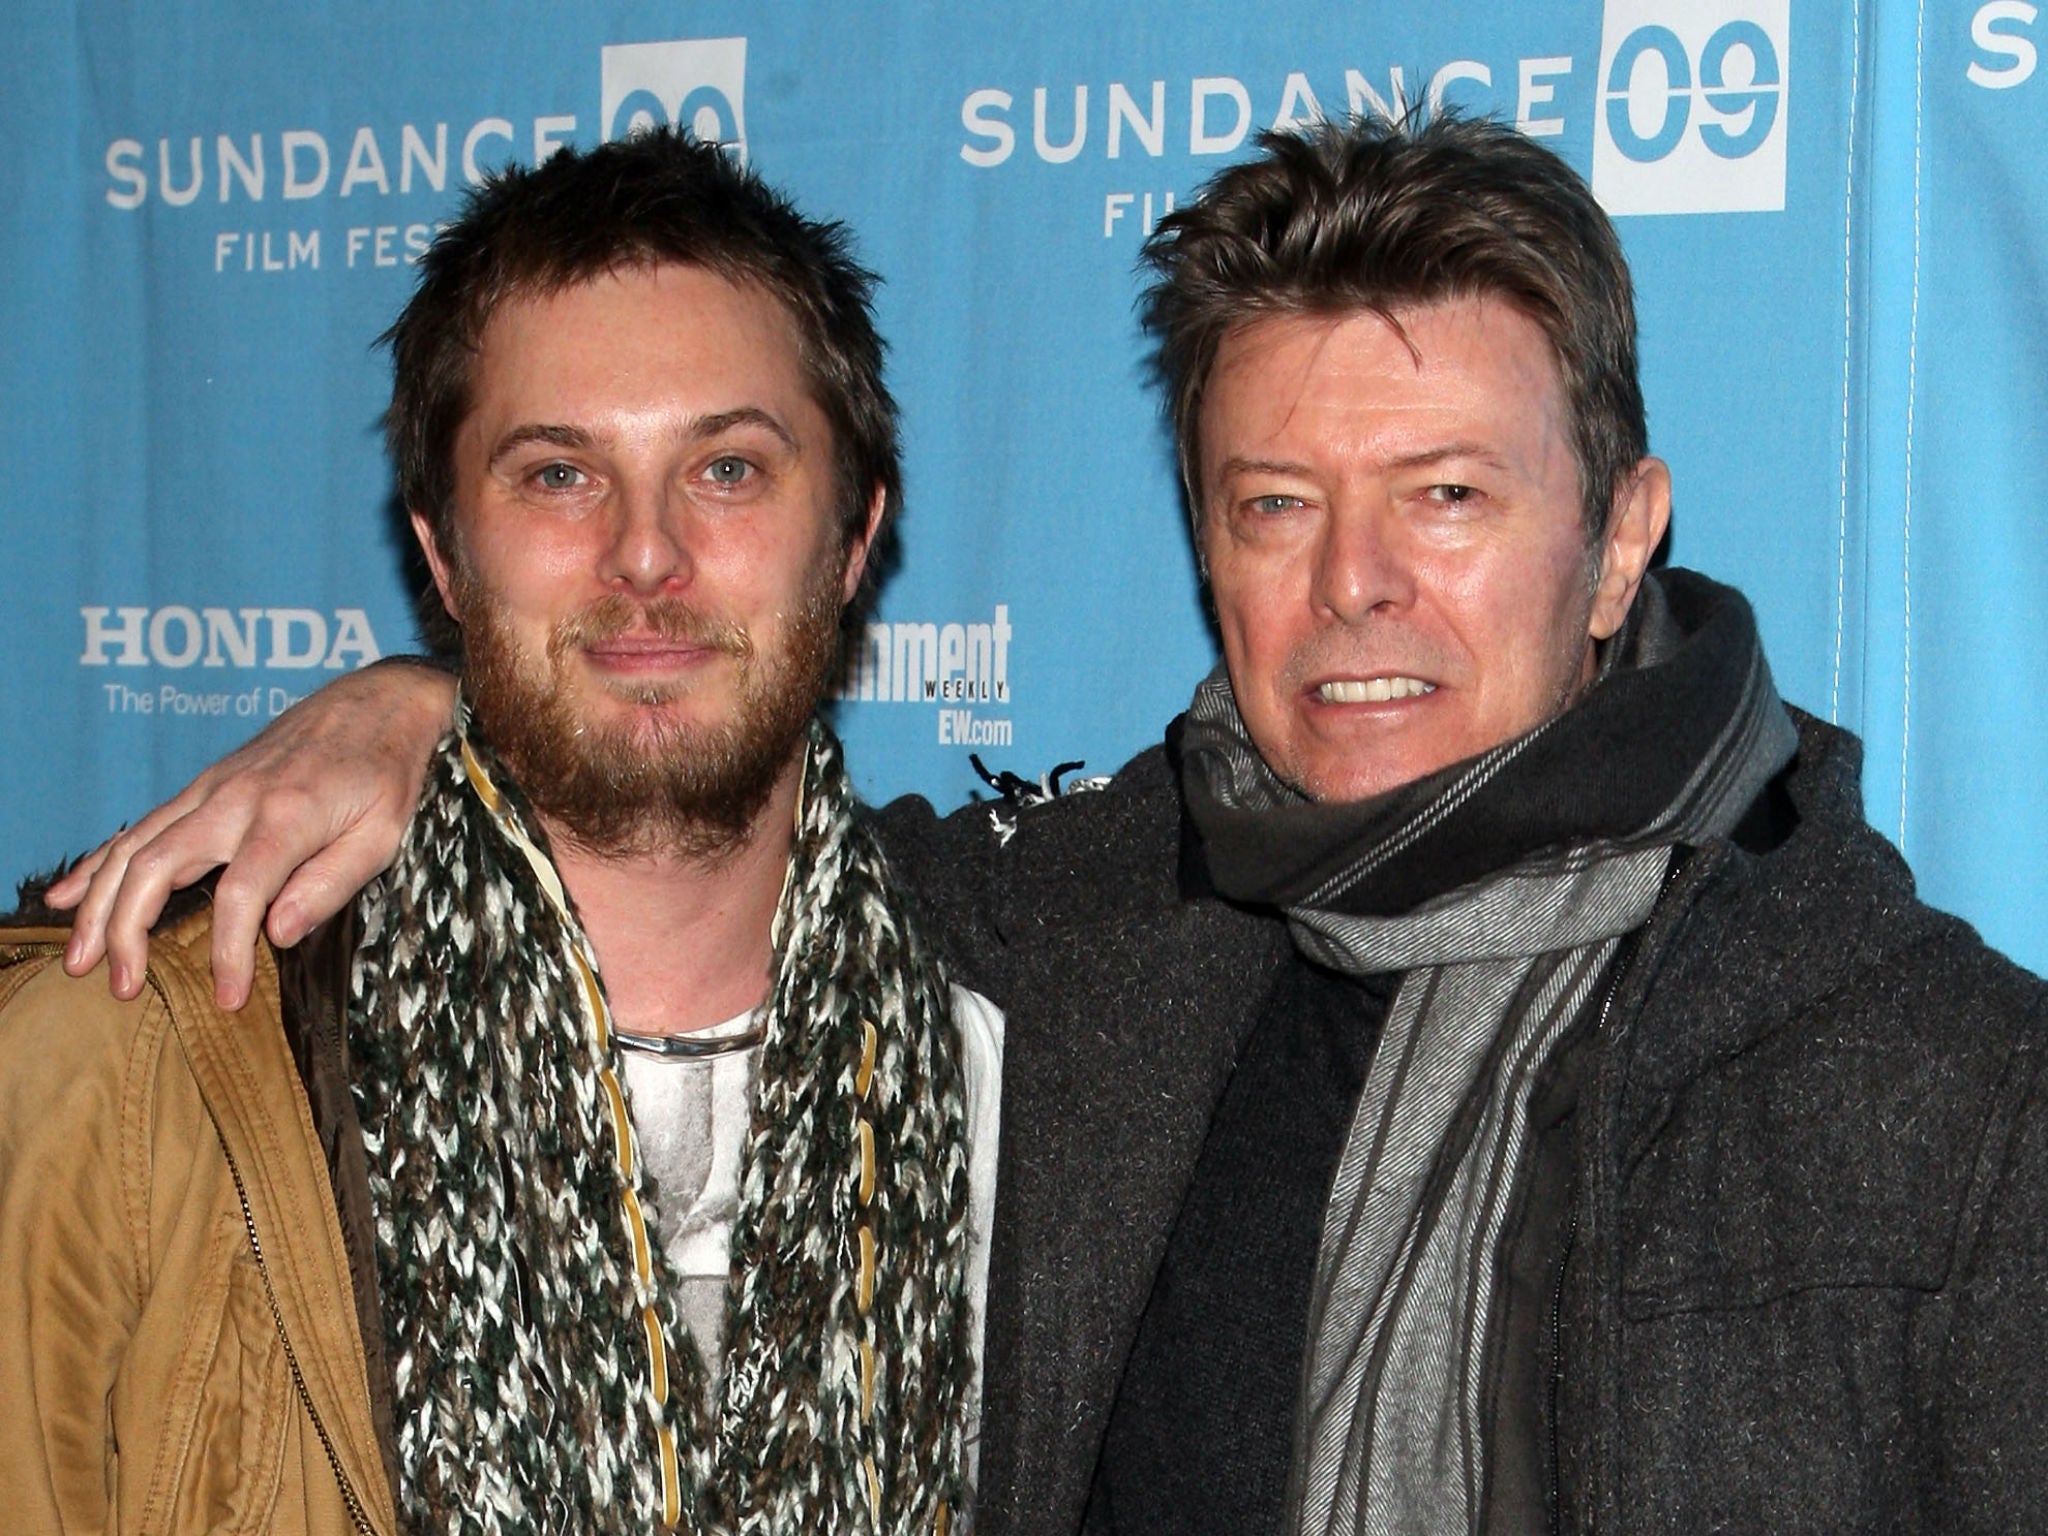 Duncan Jones with his father David Bowie in 2009. Photo credit: Bryan Bedder/Getty Images